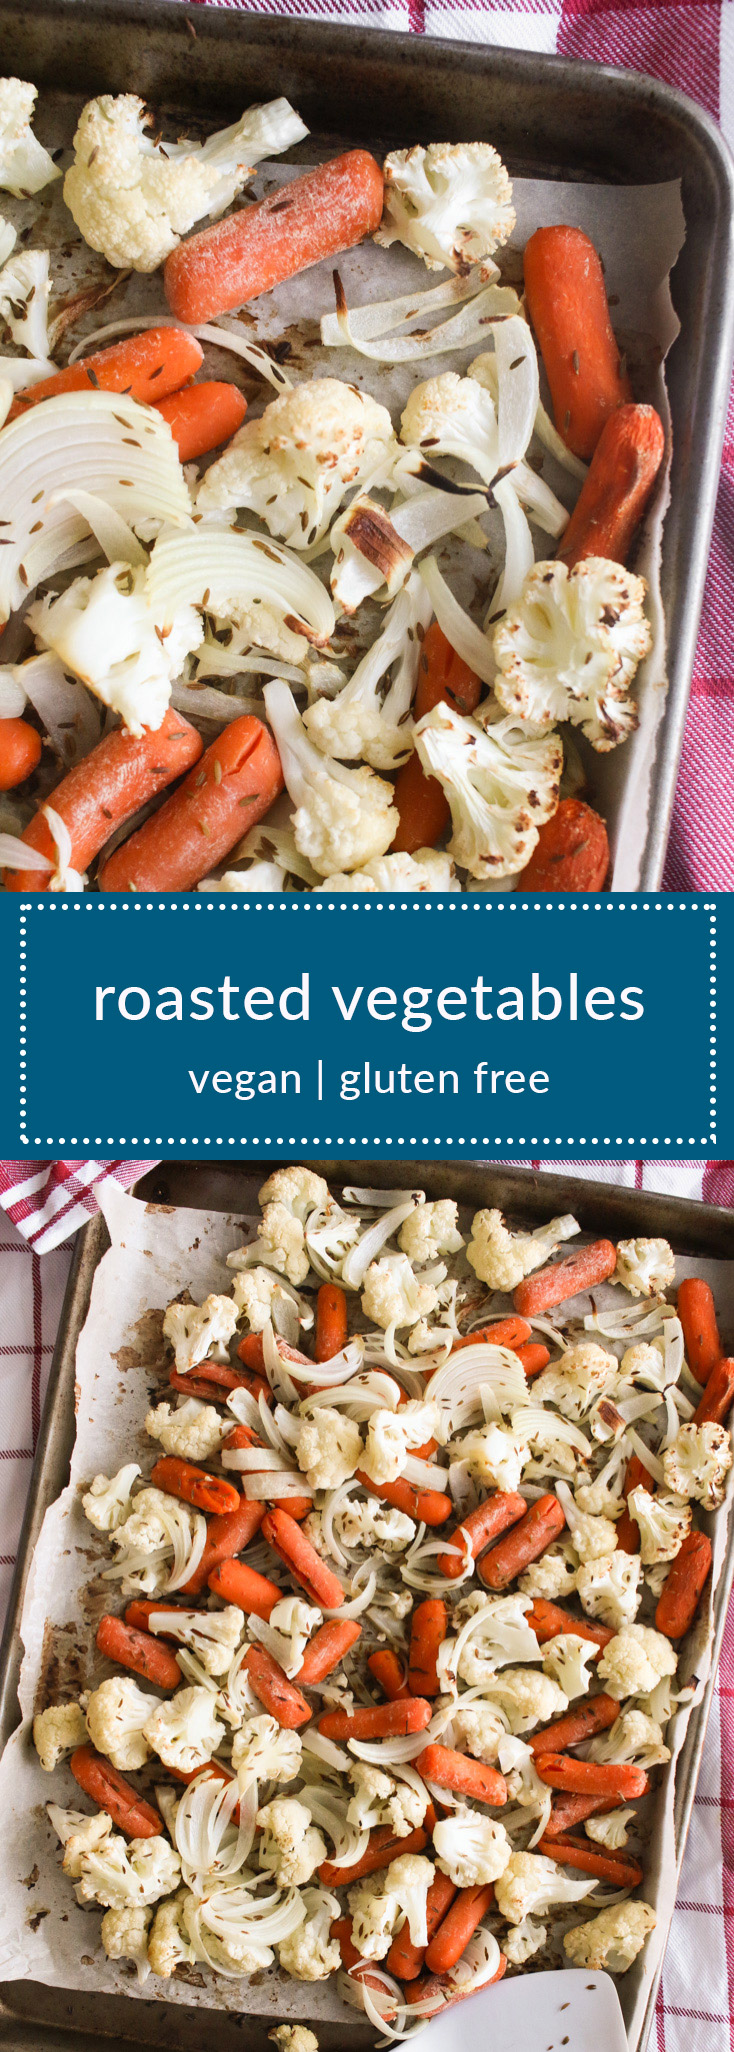 these roasted vegetables are easy and adaptable. they take less than 30 minutes to cook and work with any vegetables and spices/herbs.